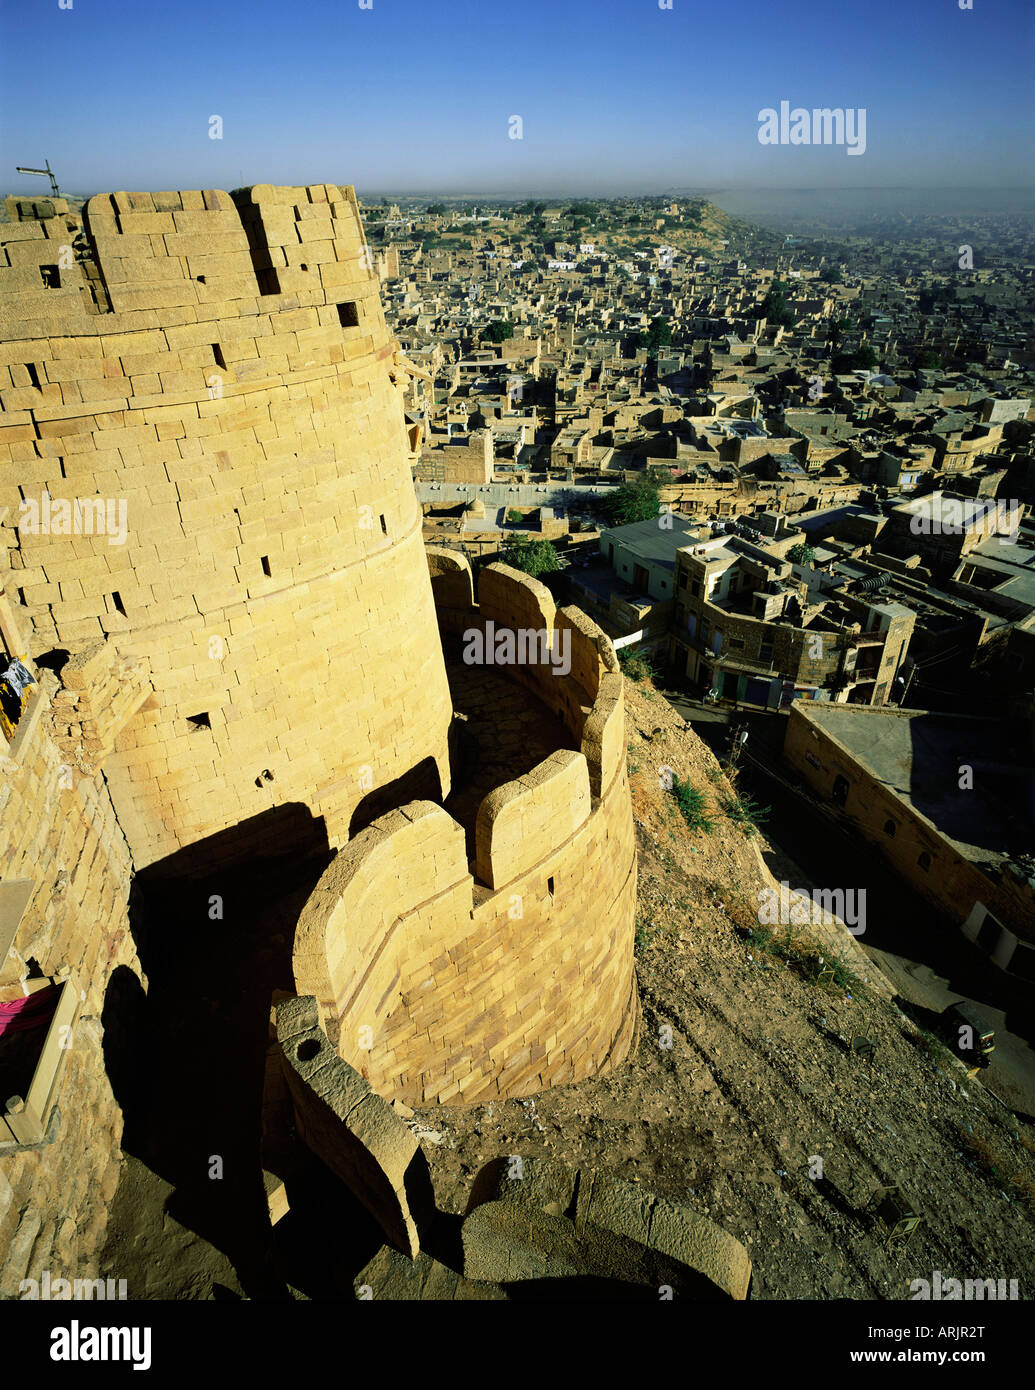 View of Jaisalmer and old surrounding walls, western Rajasthan, Rajasthan state, India, Asia Stock Photo